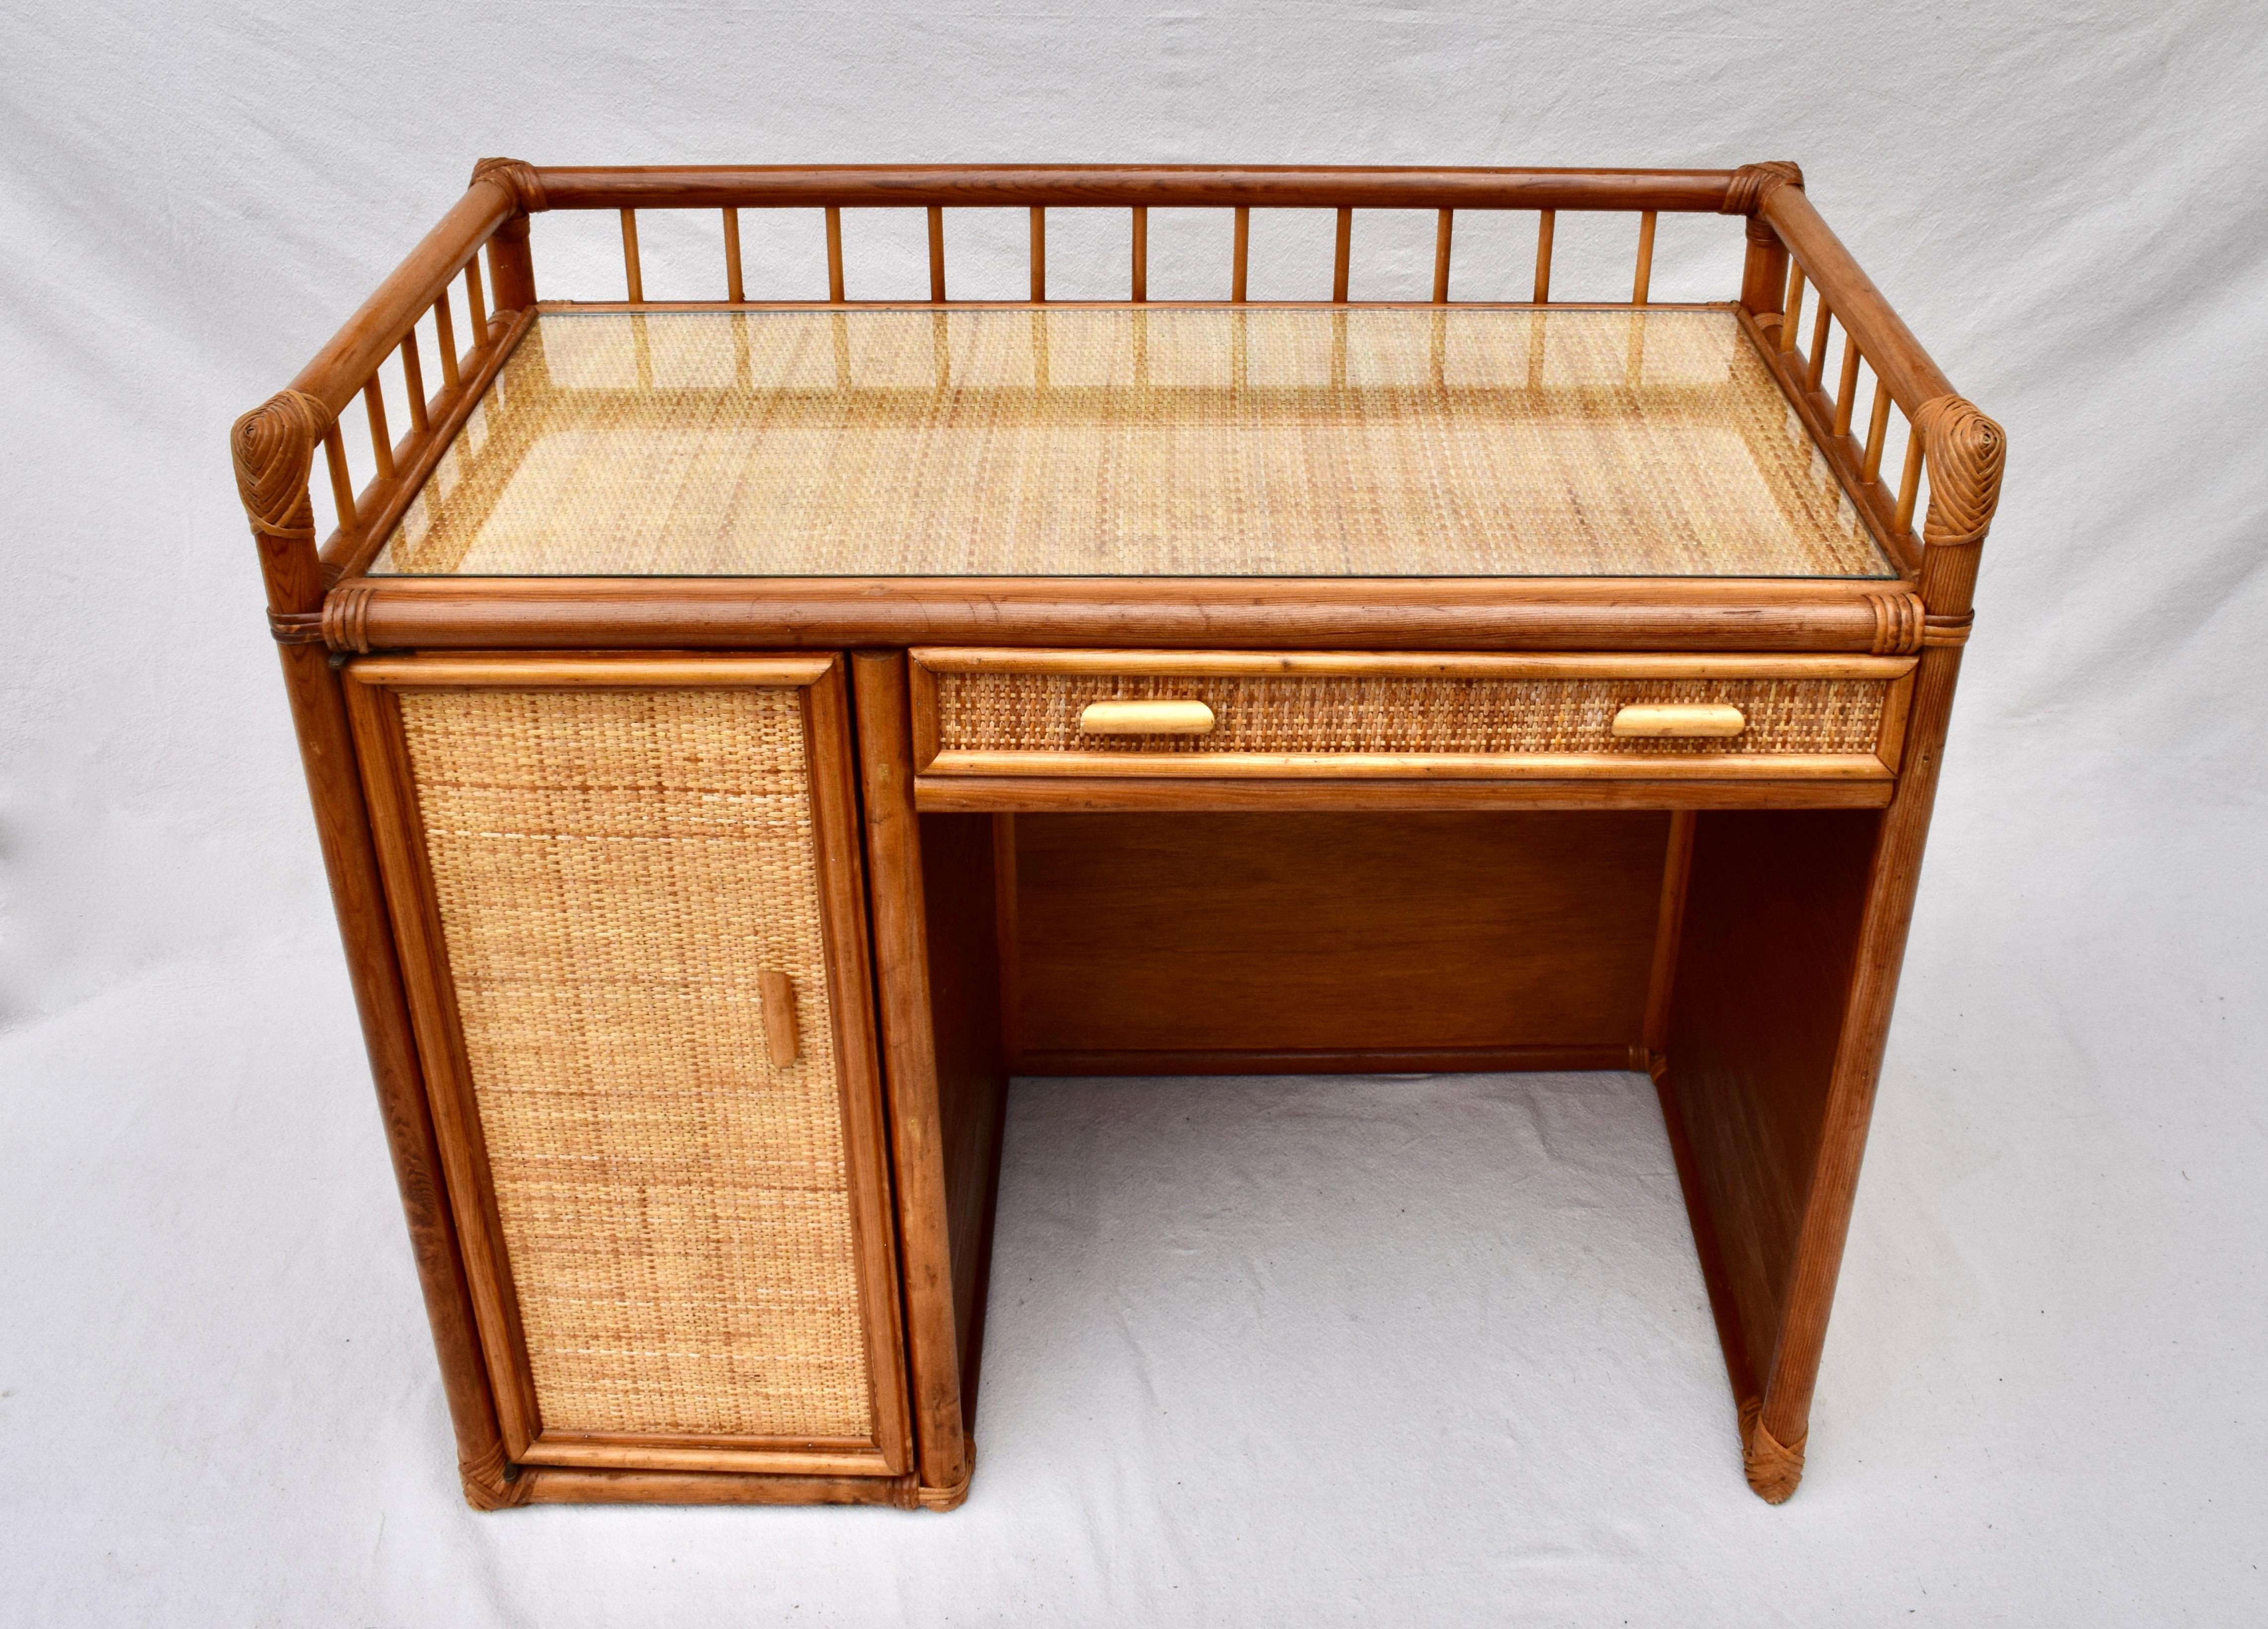 An unusual small scale bamboo rattan & grasscloth writing desk with single drawer, door & shelf. Interesting gallery detailing to the top; Includes custom glass top. 1970's made in Italy.